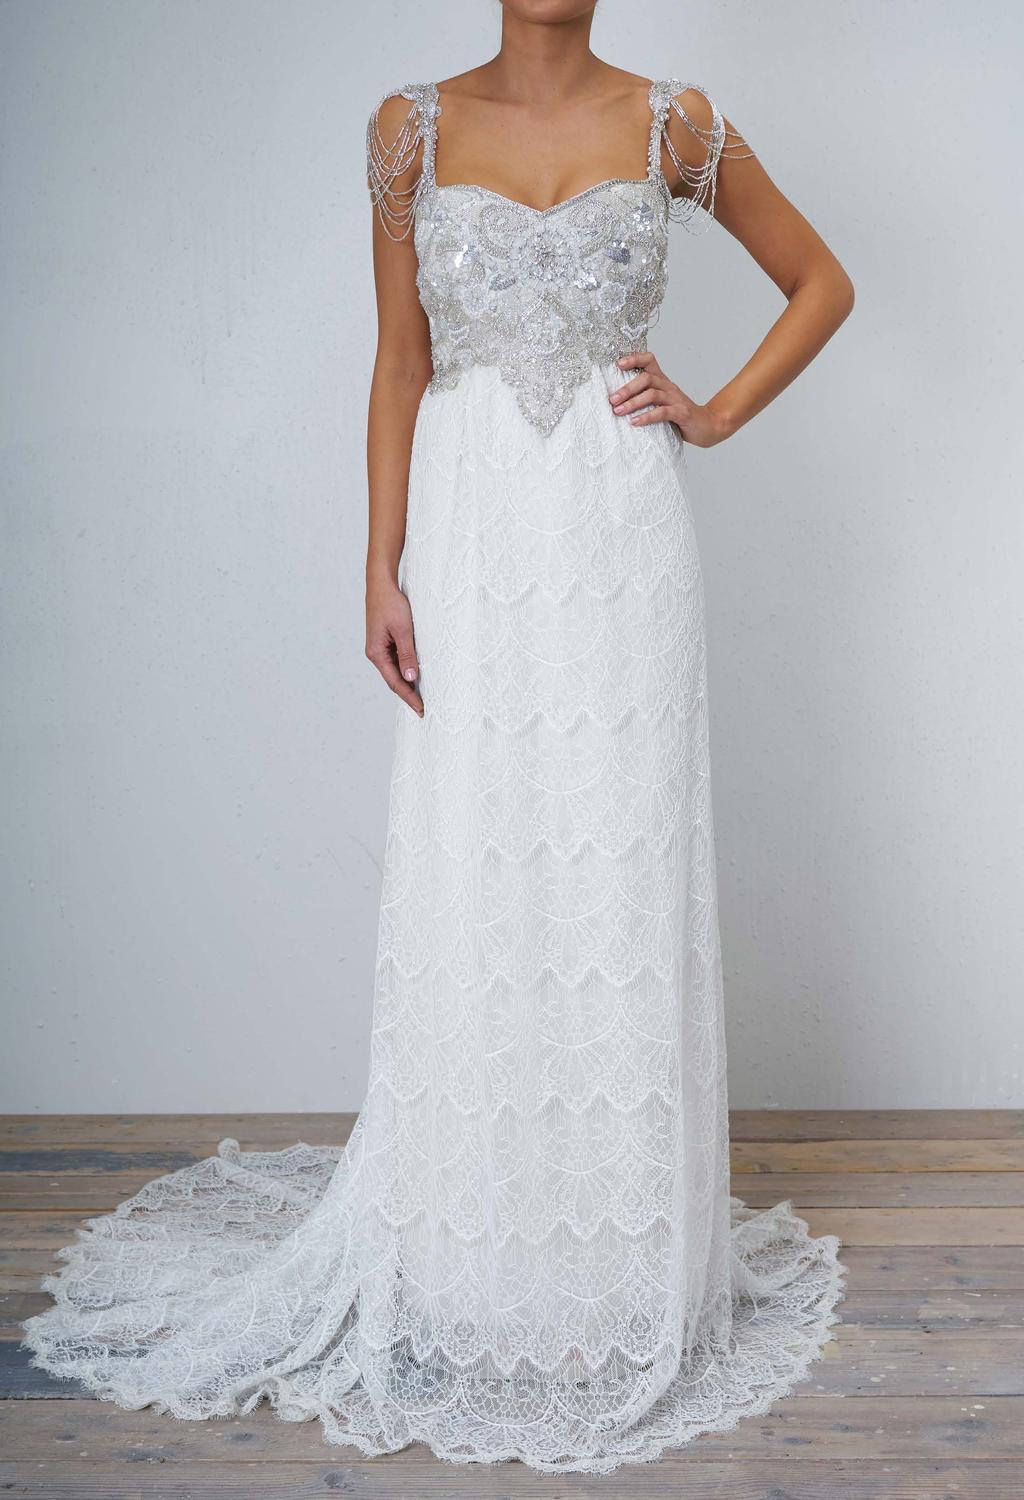 look, perfect for any wedding styling!